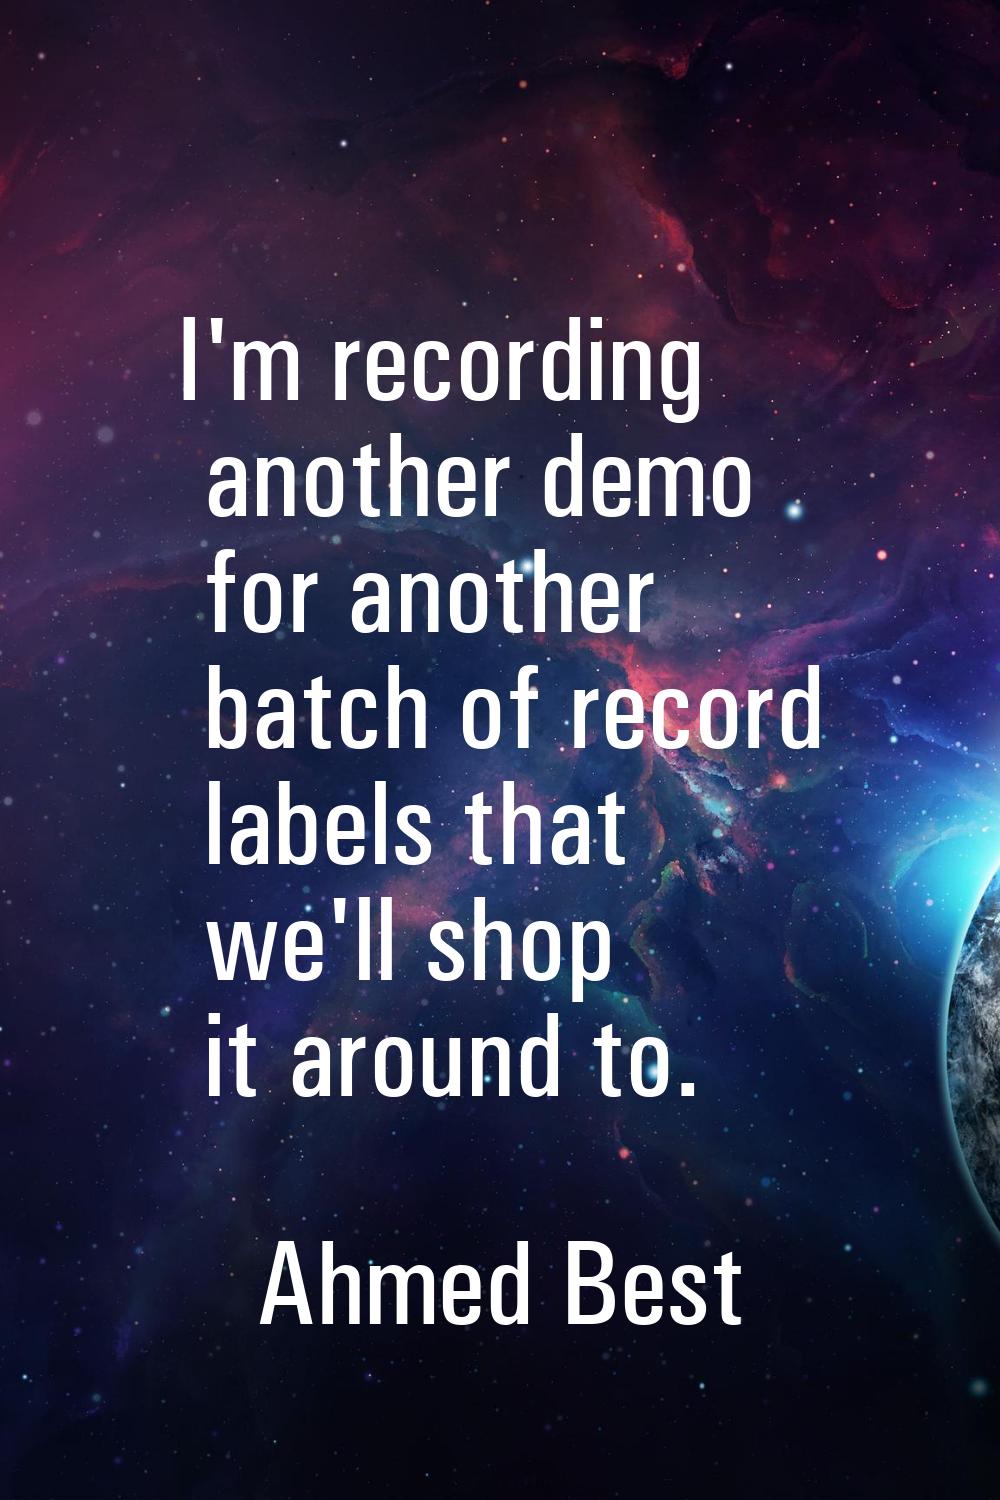 I'm recording another demo for another batch of record labels that we'll shop it around to.